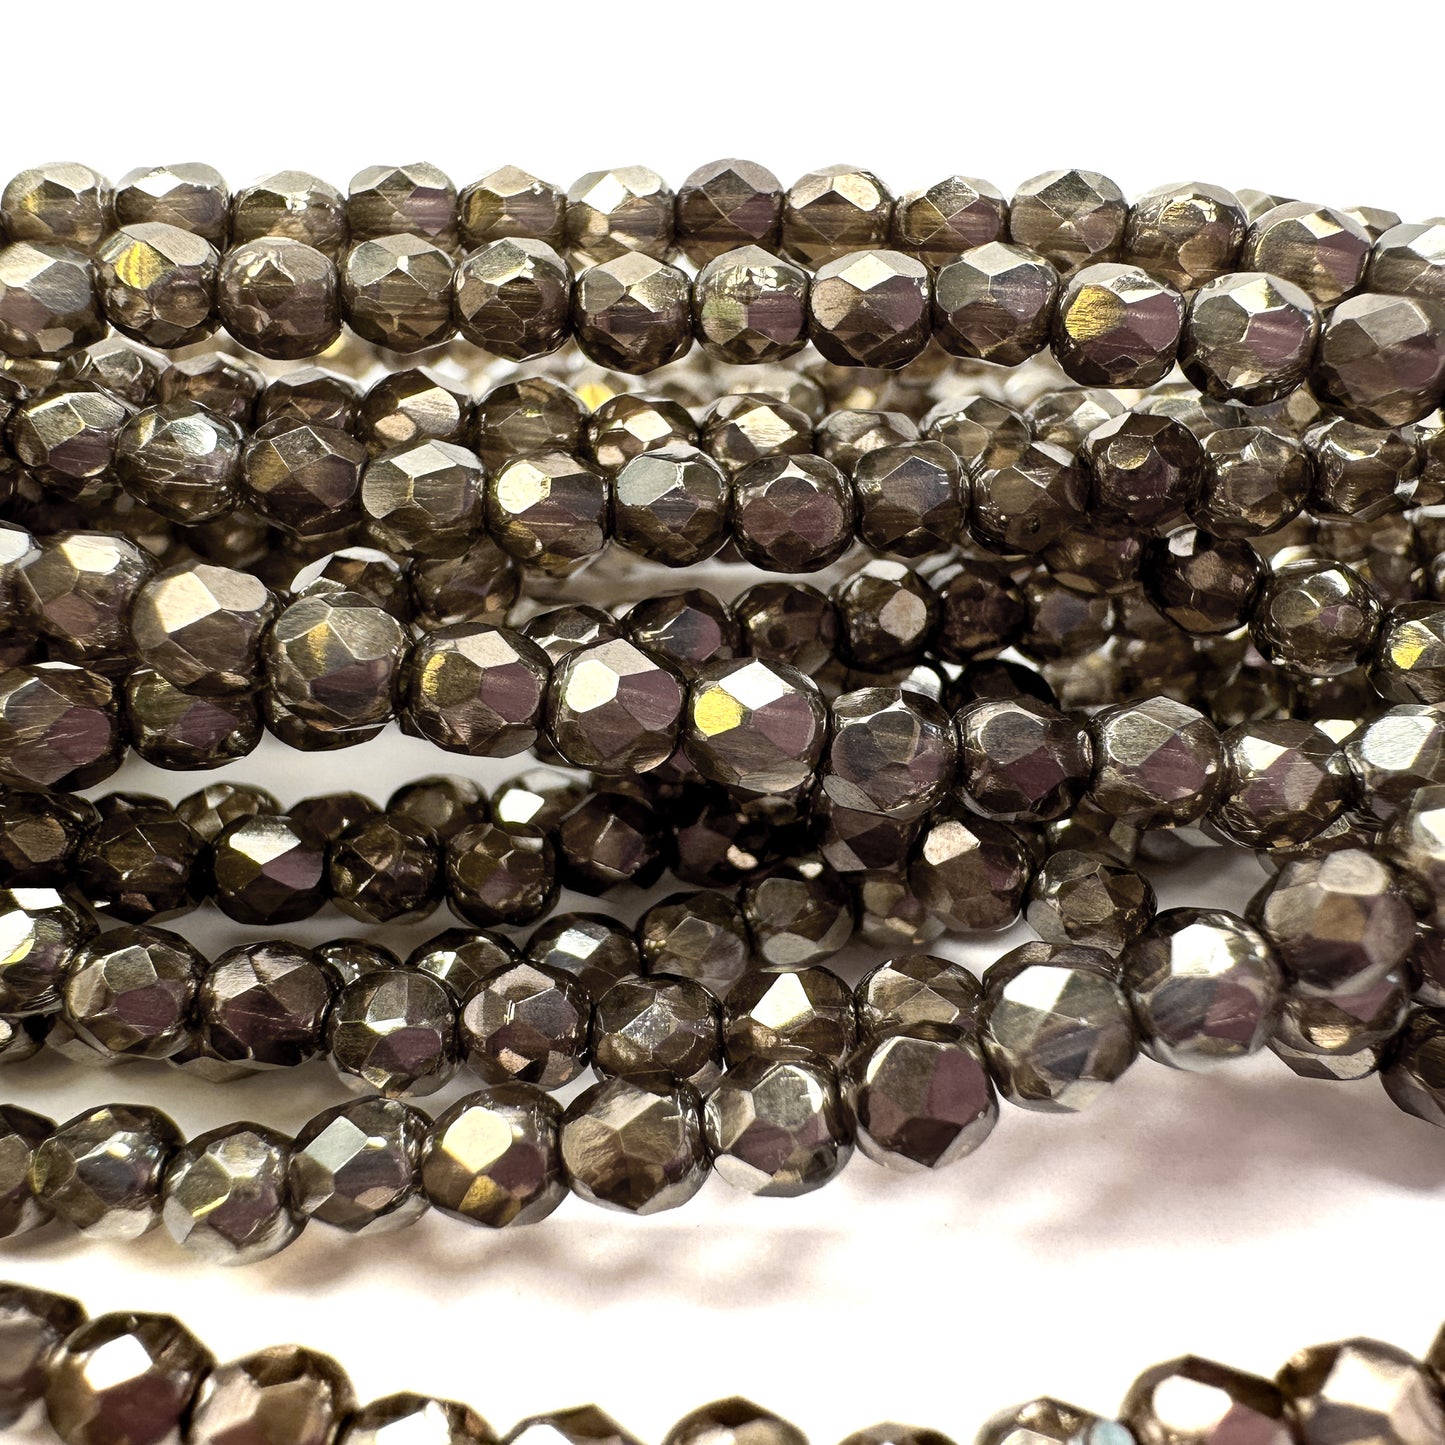 Dark Chrome Luster 4mm Faceted Glass Bead - 50 pcs.-The Bead Gallery Honolulu